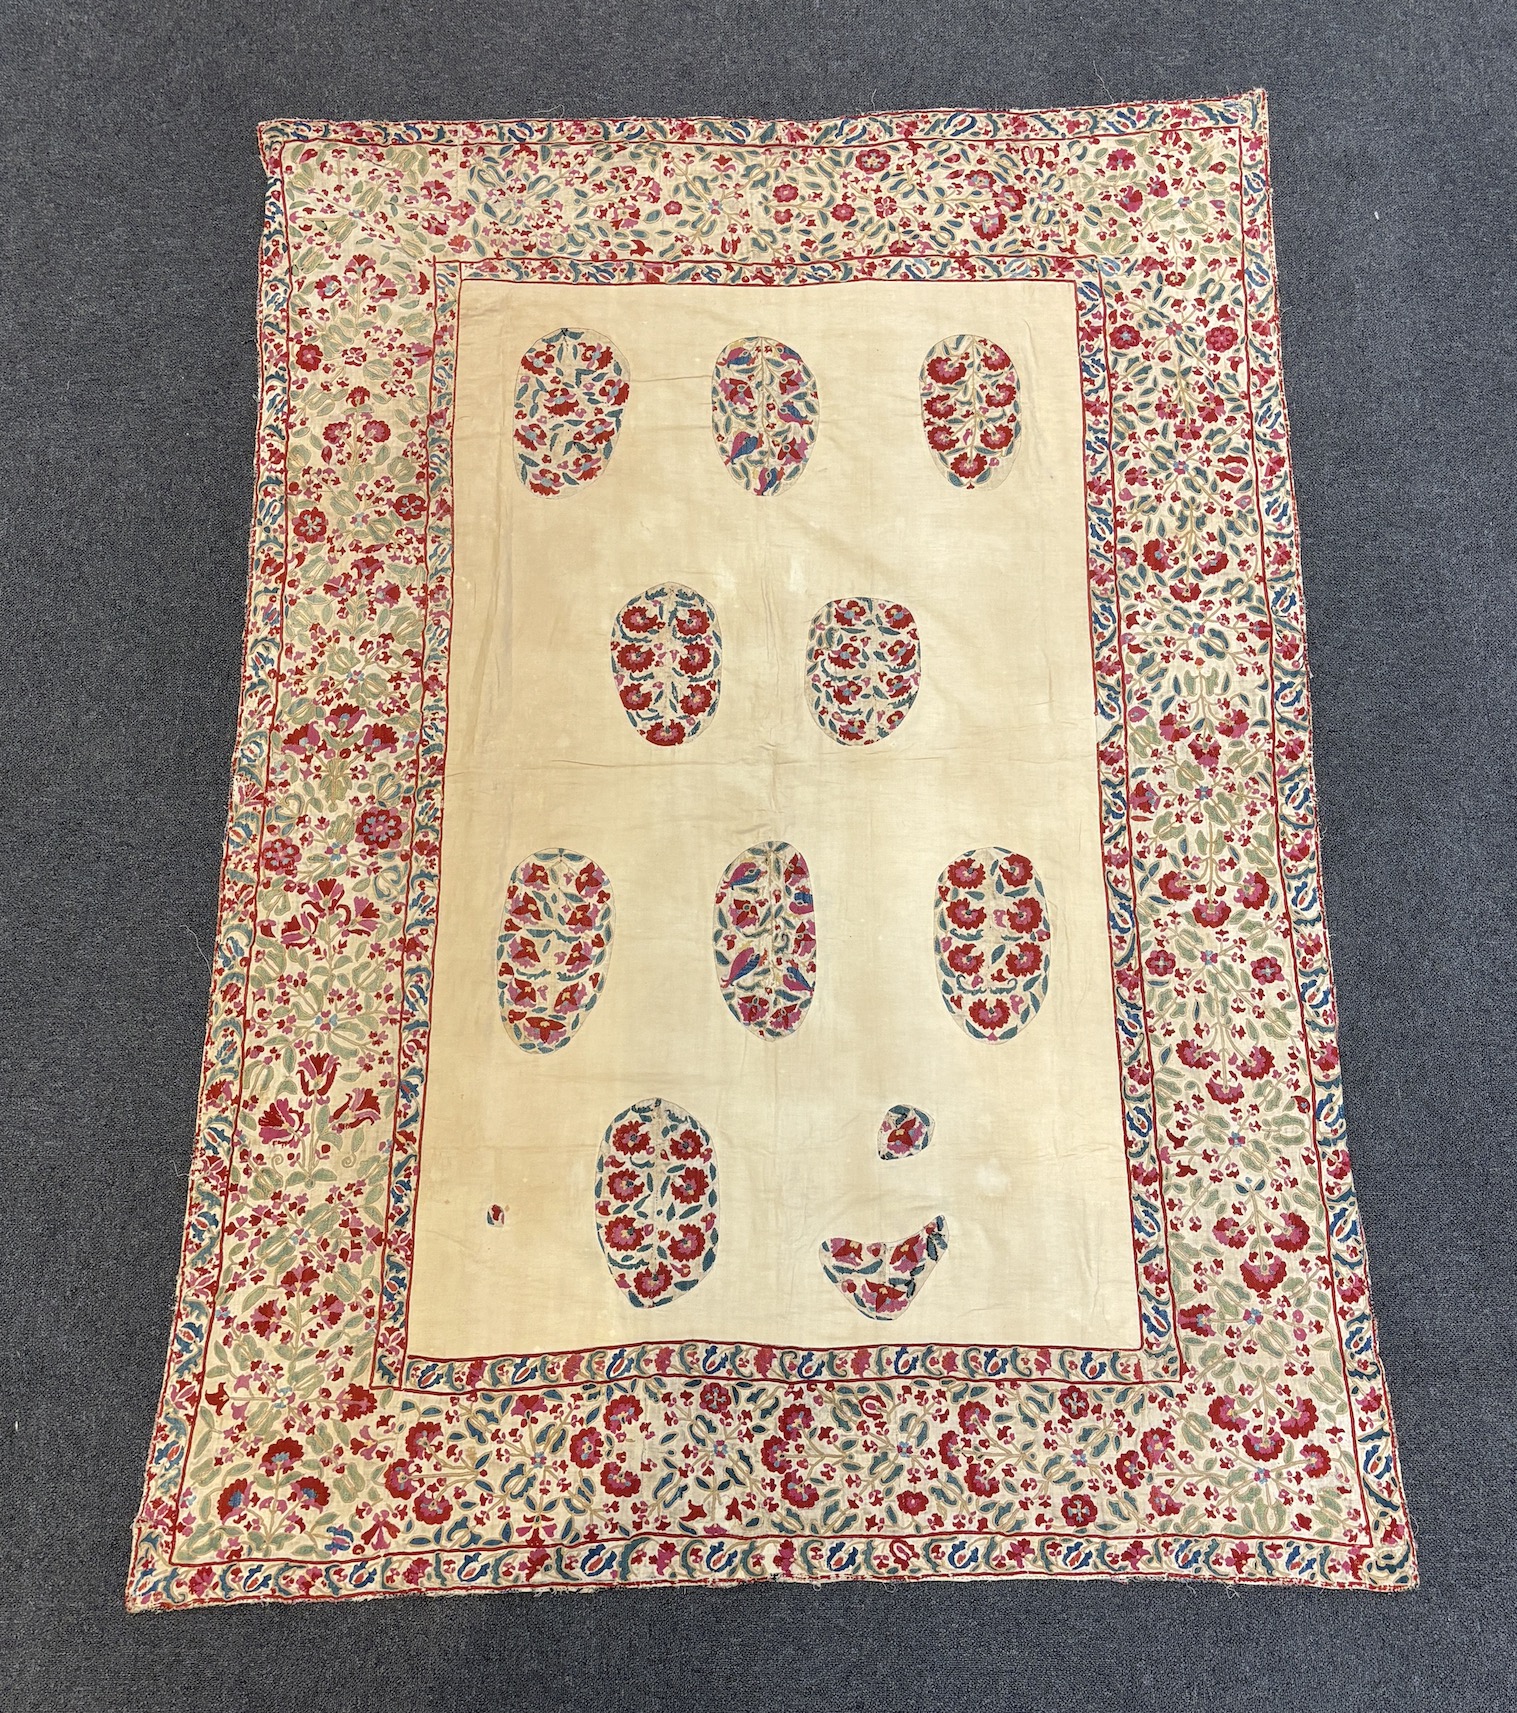 A mid to late 19th century Uzbek Suzani, embroidered in hand dyed silks with a symbolic floral and foliate design as wide border, the central panel has been recovered, only revealing a few spot motifs of the original emb